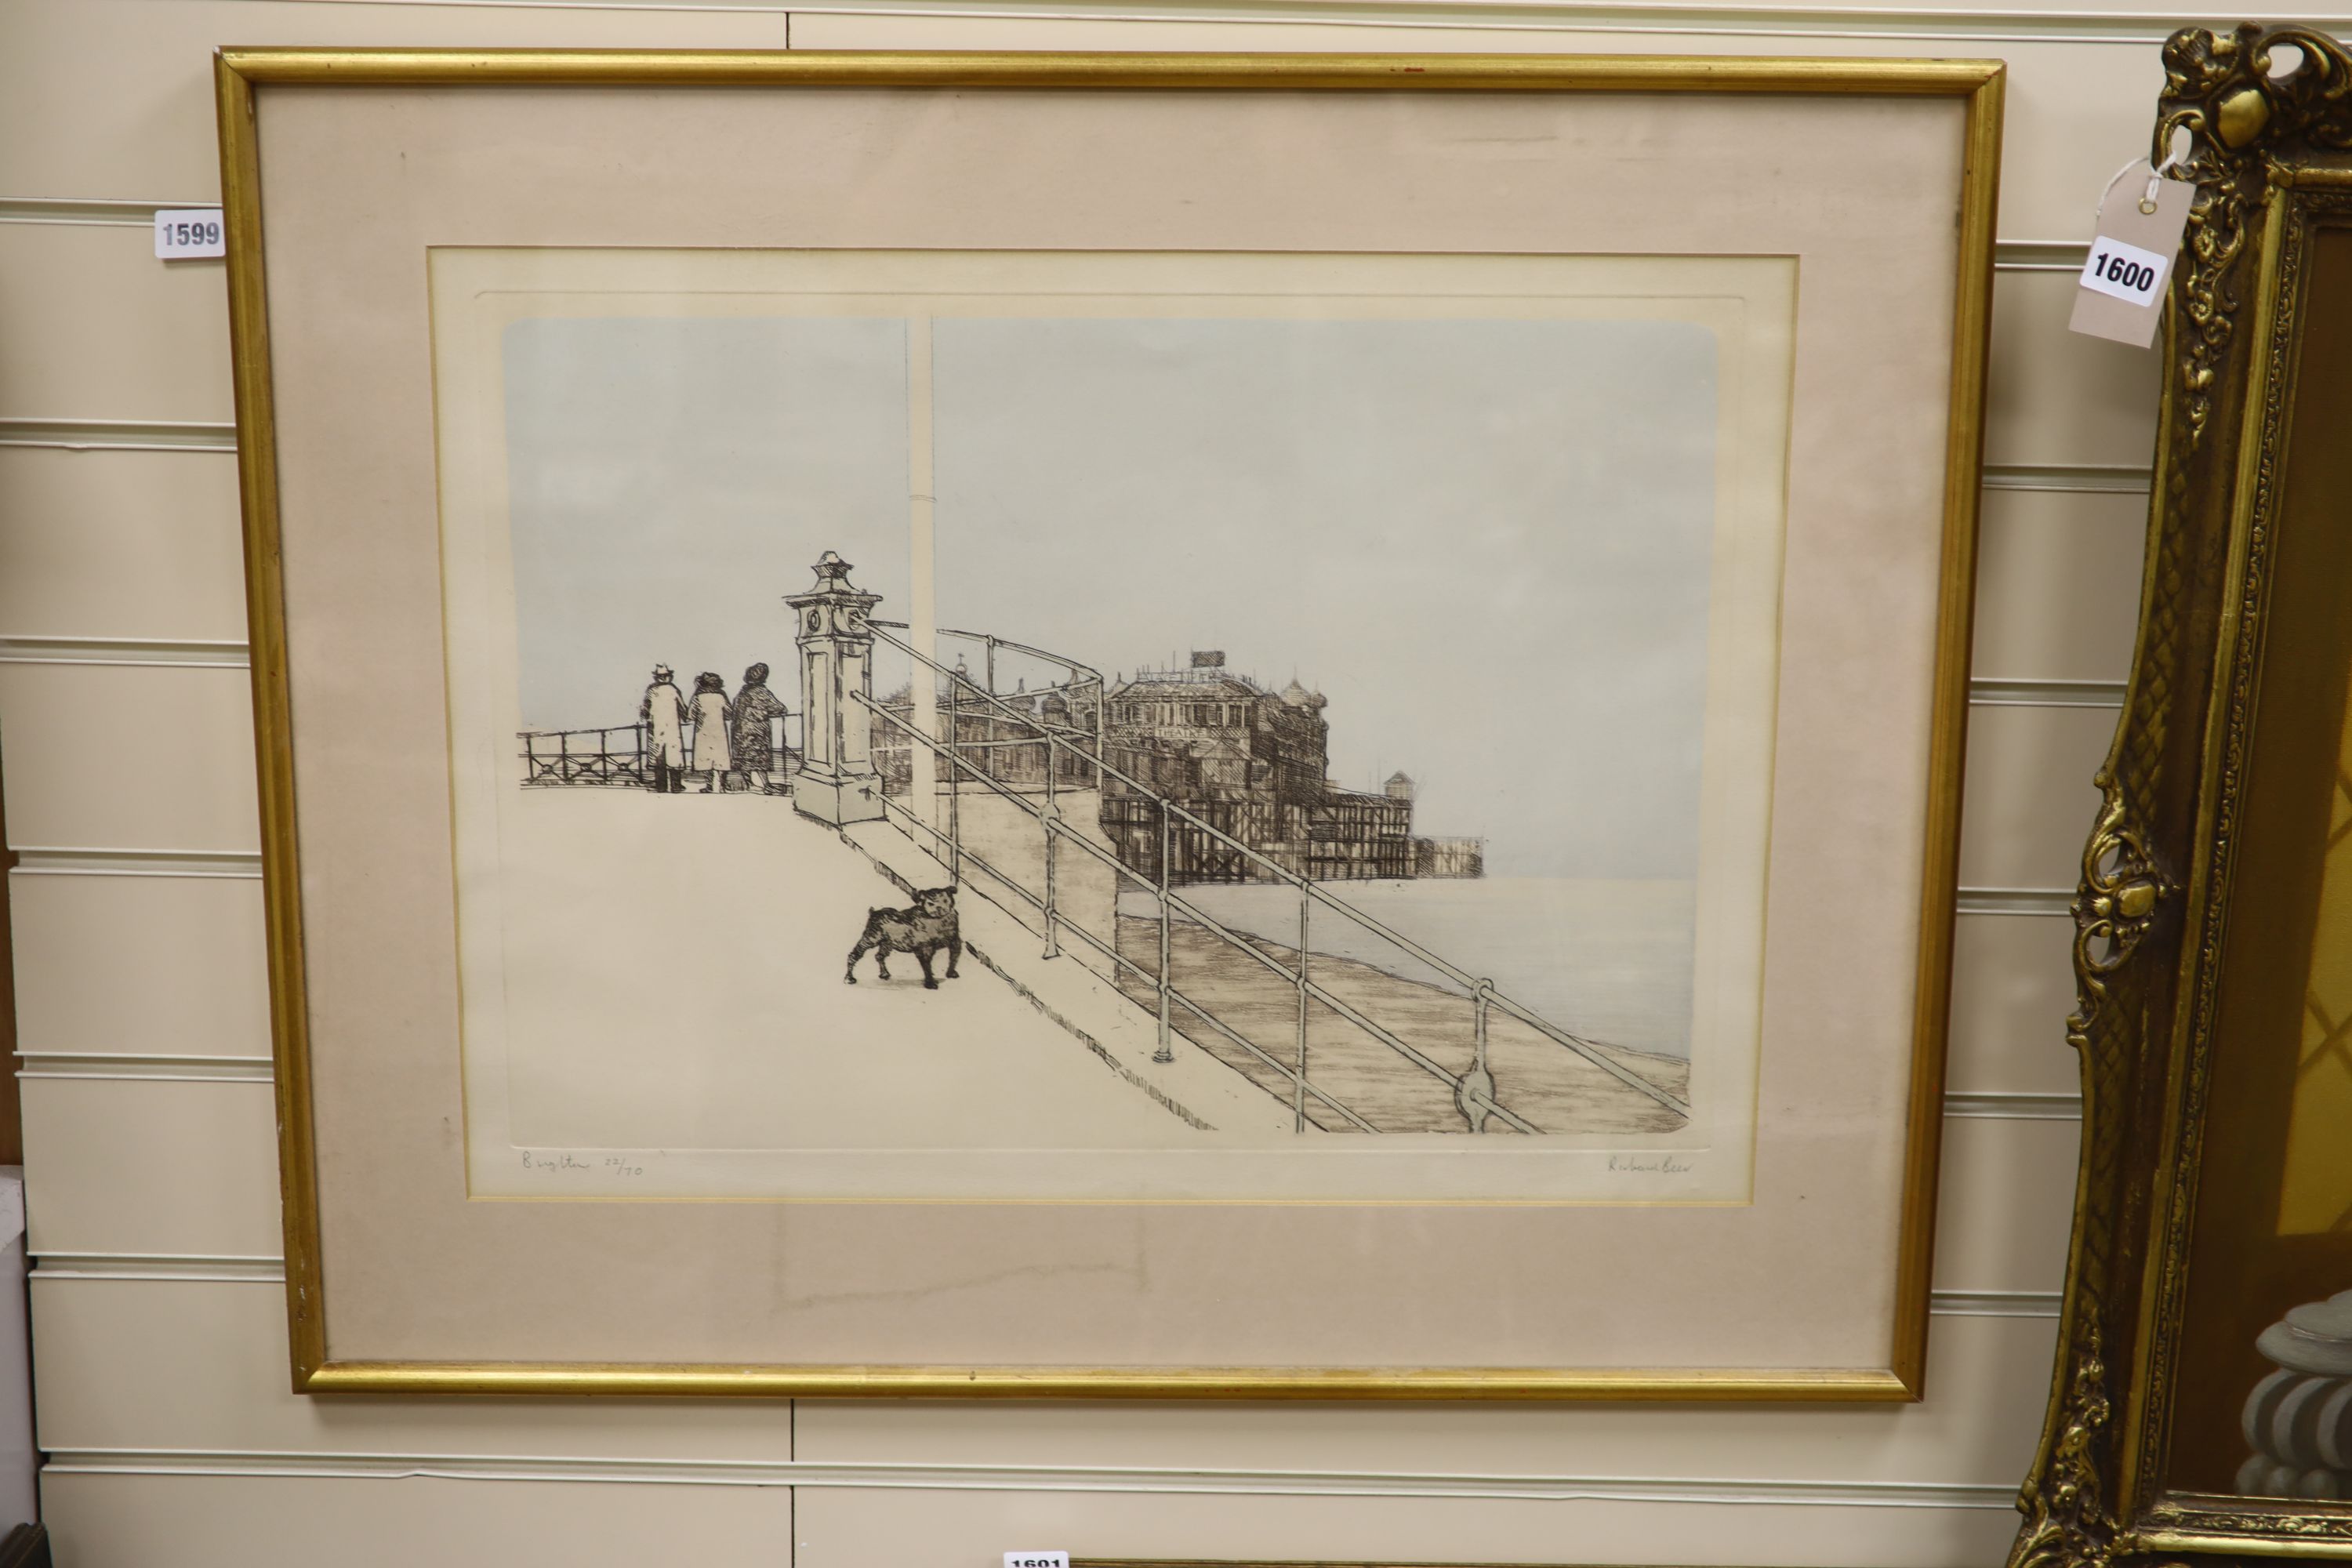 Richard Beer, limited edition print, Palace Pier, Brighton, signed, 22/70, 40 x 56cm